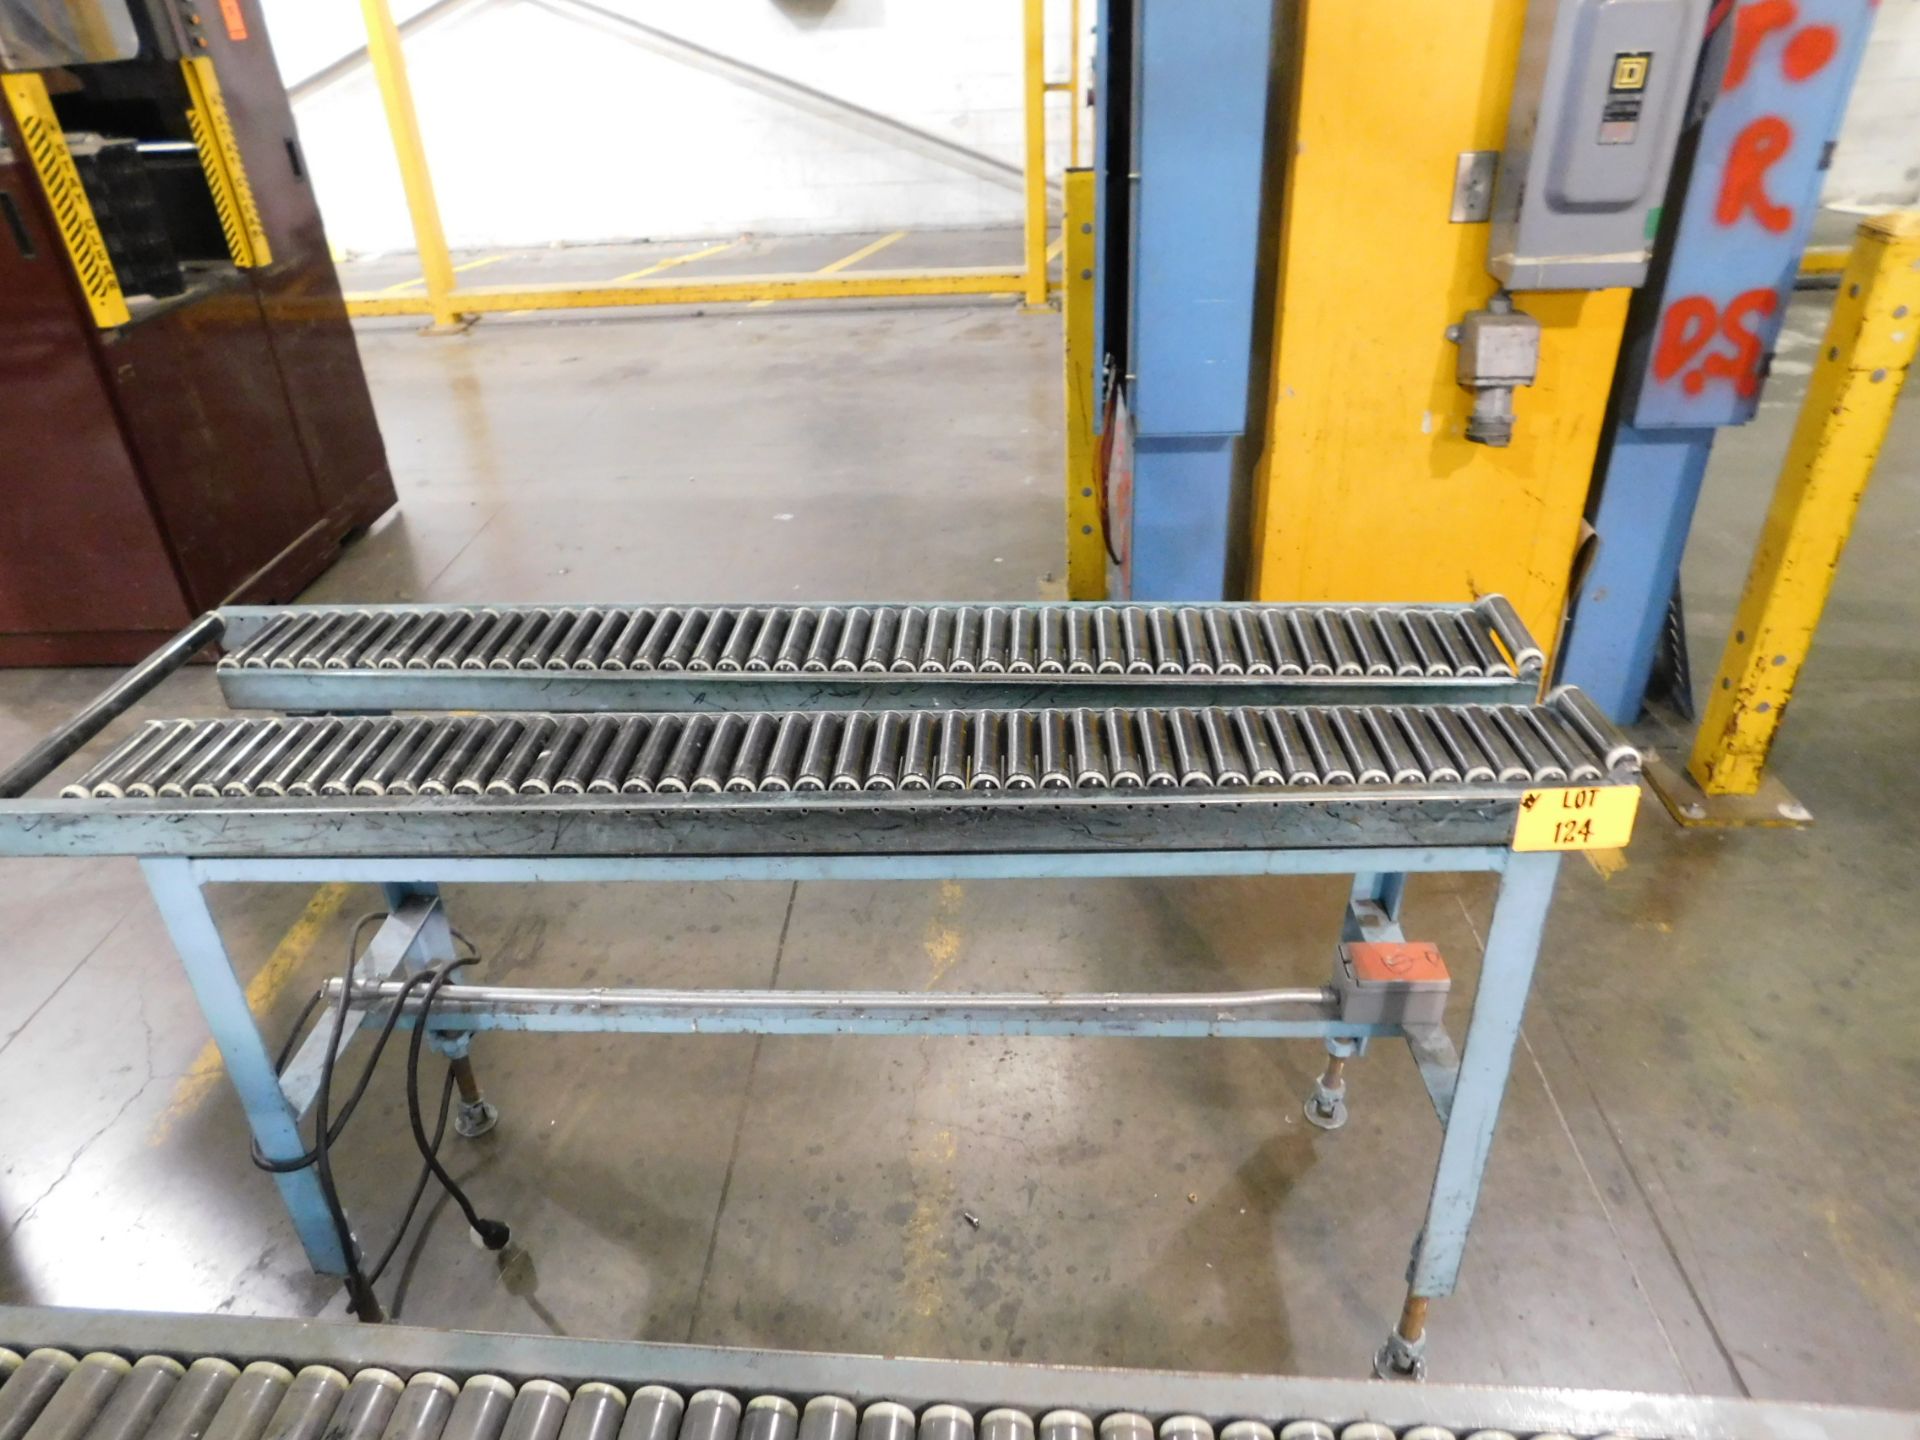 2002 Dynark banding machine with discharge roller conveyor, 5 ft. long by 18 in. wide, asset # - Image 3 of 3